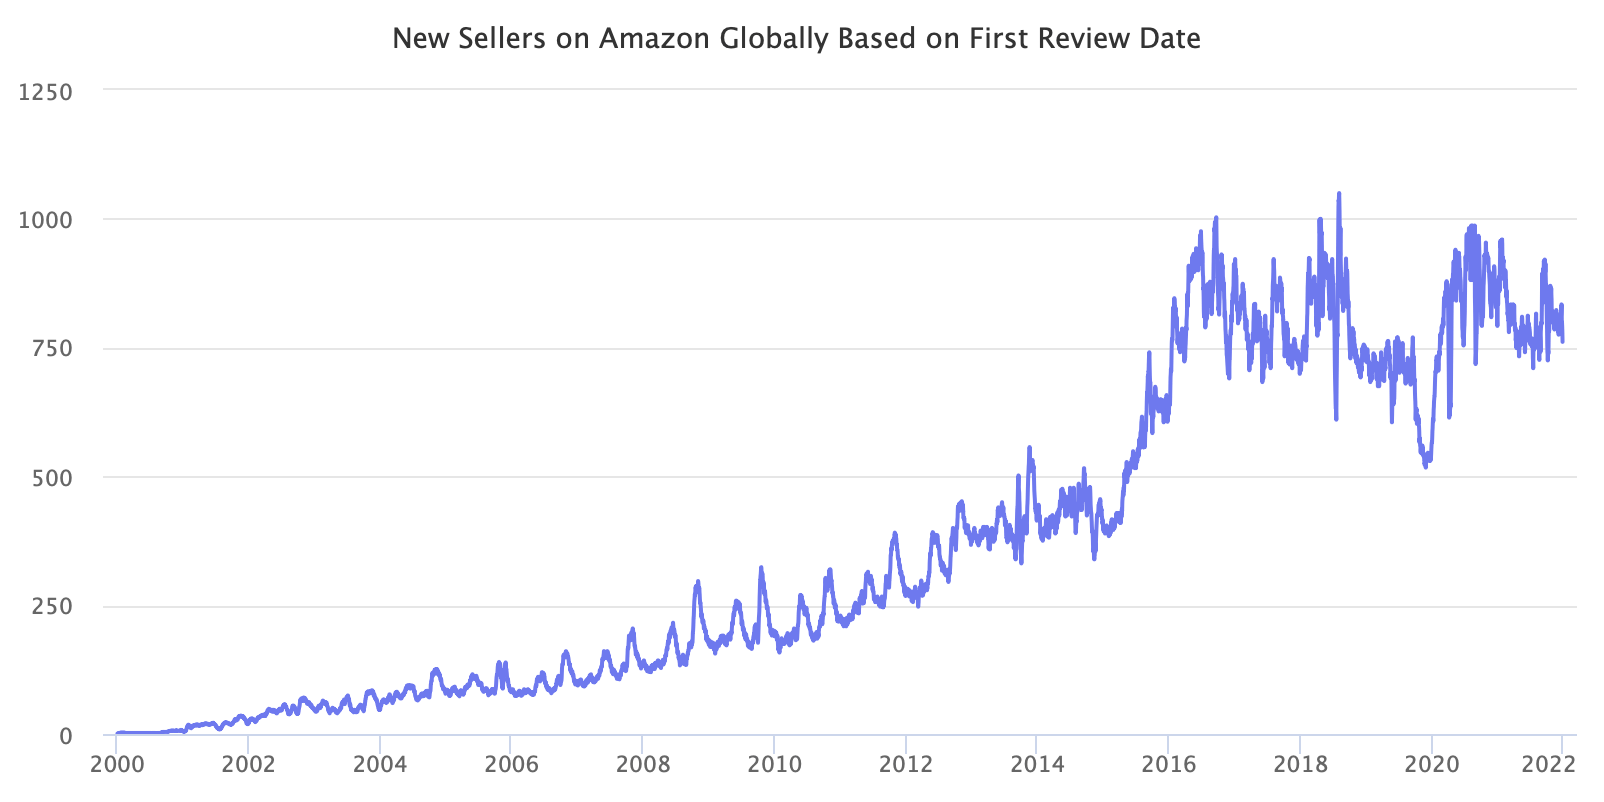 New Sellers on Amazon Globally Based on First Review Date